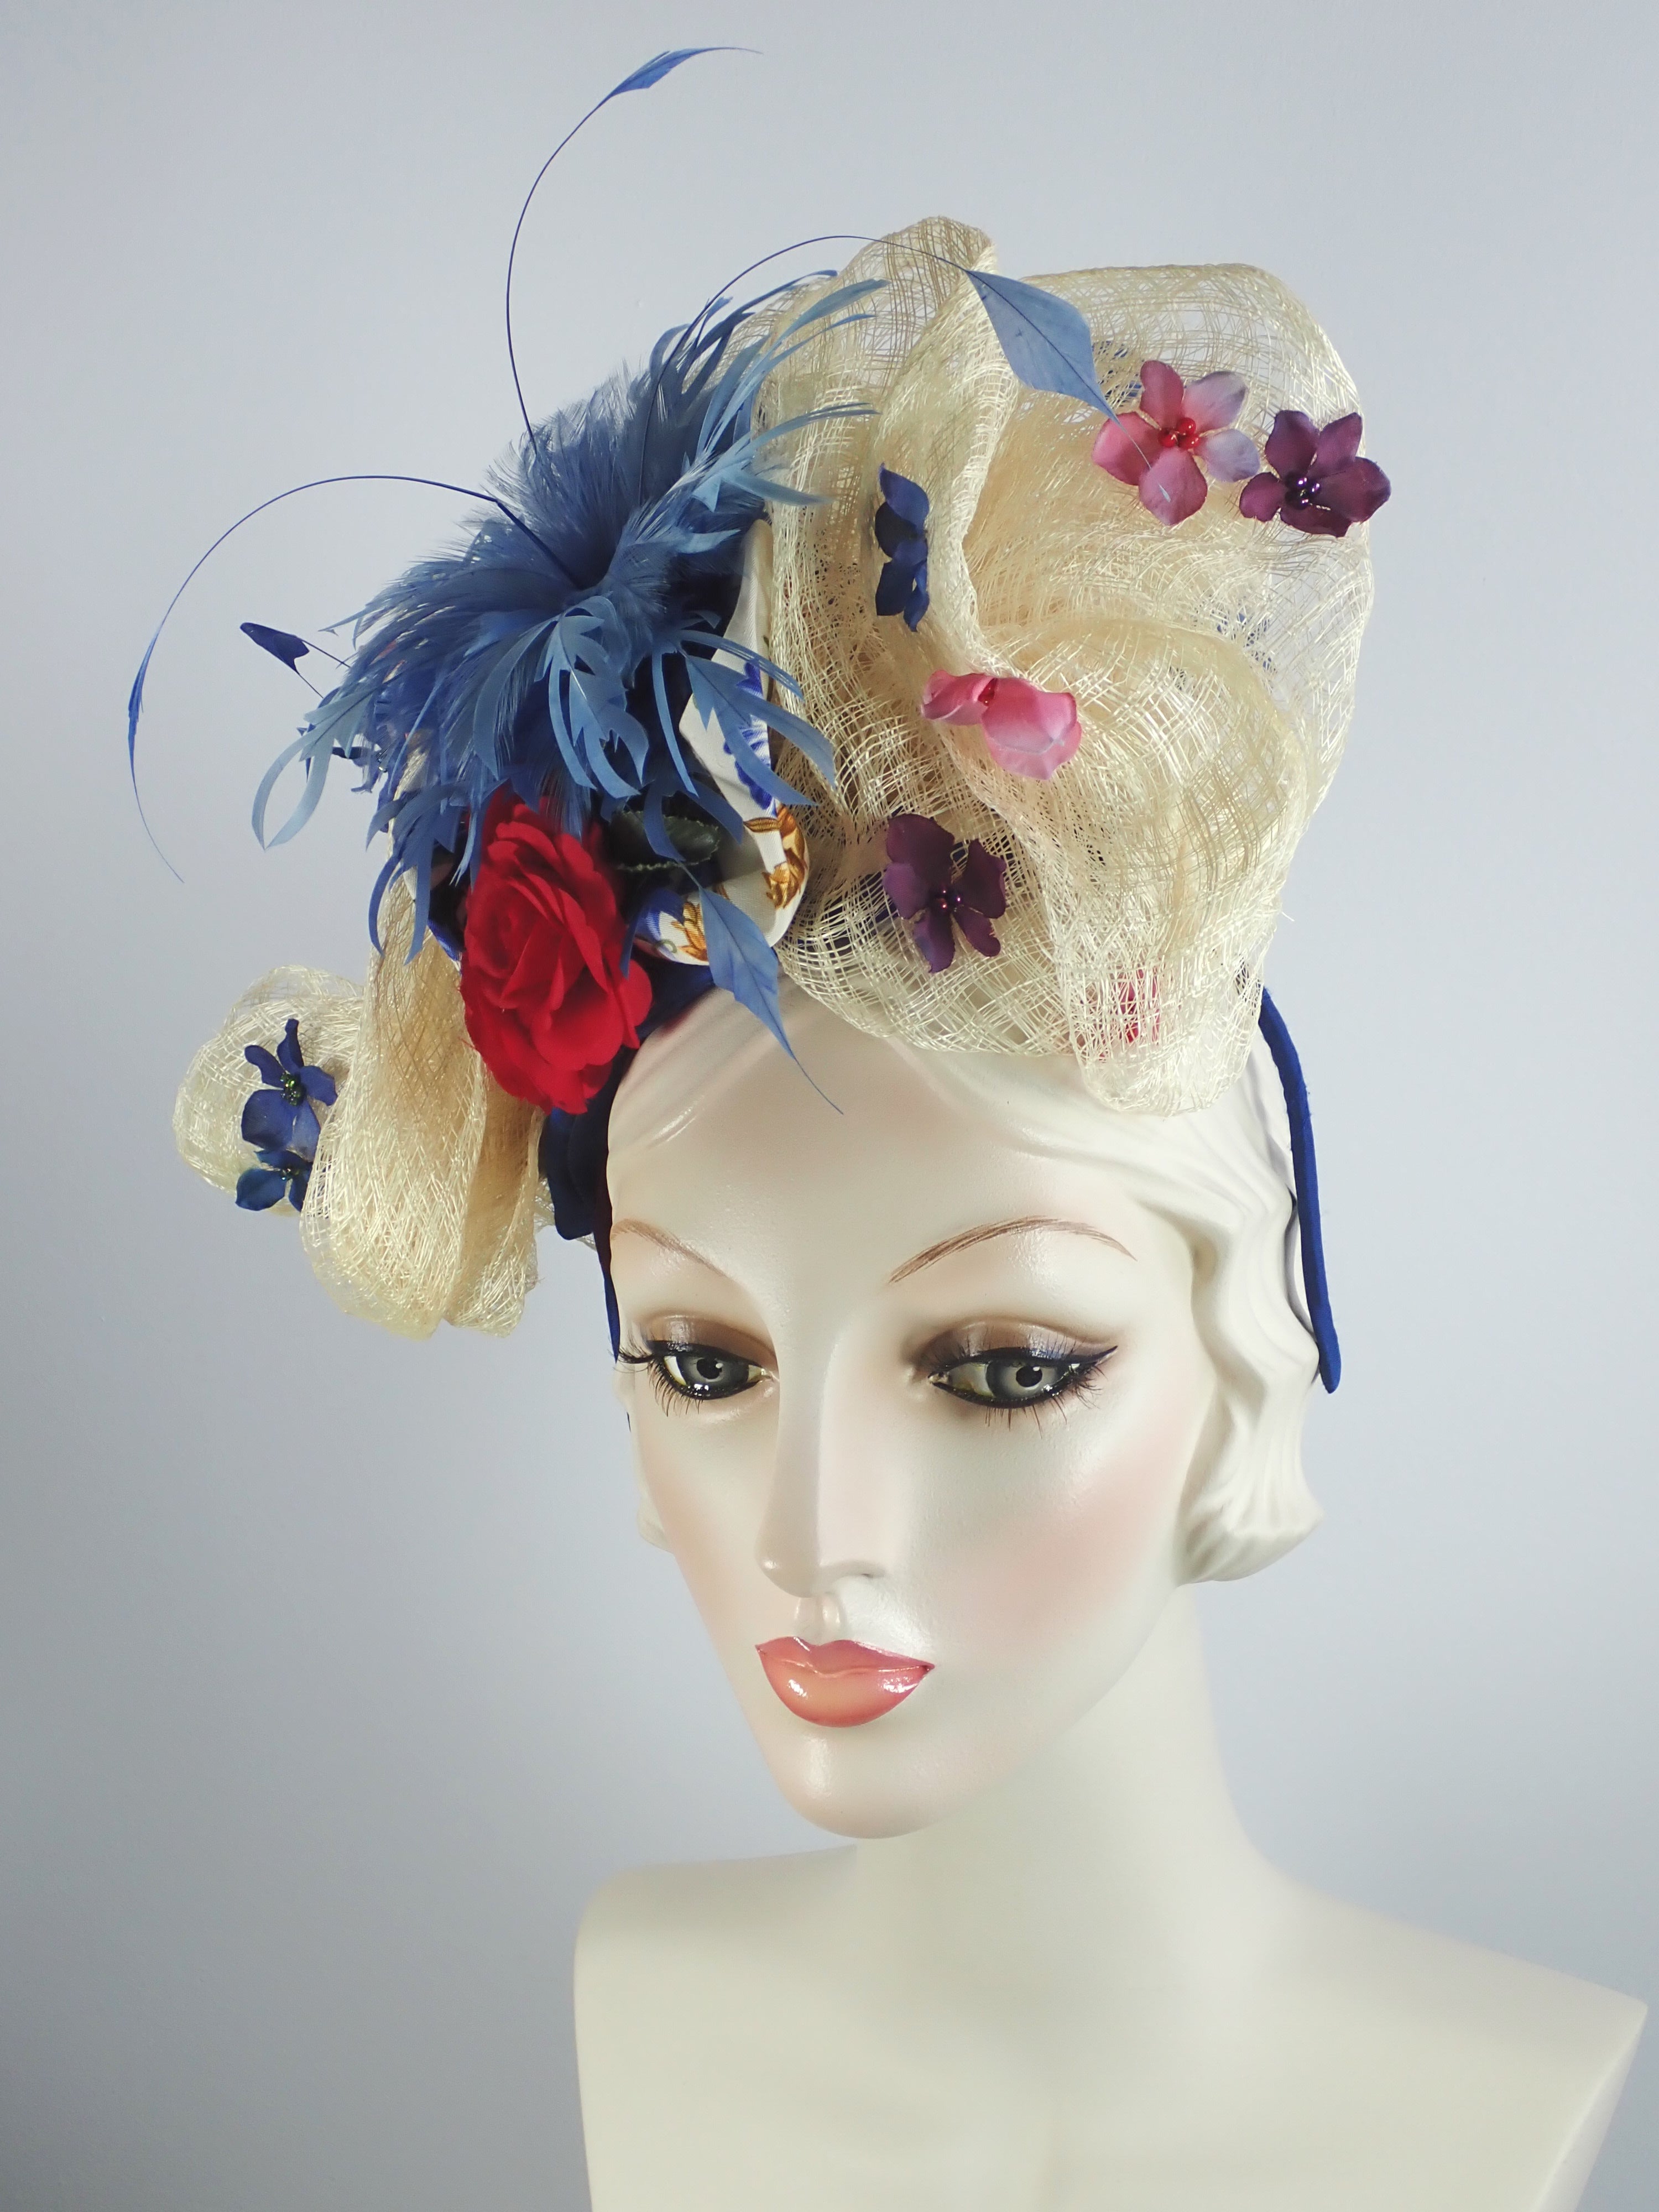 Womens Red, White, and Blue Fascinator Hat with Flowers and Blue Feathers